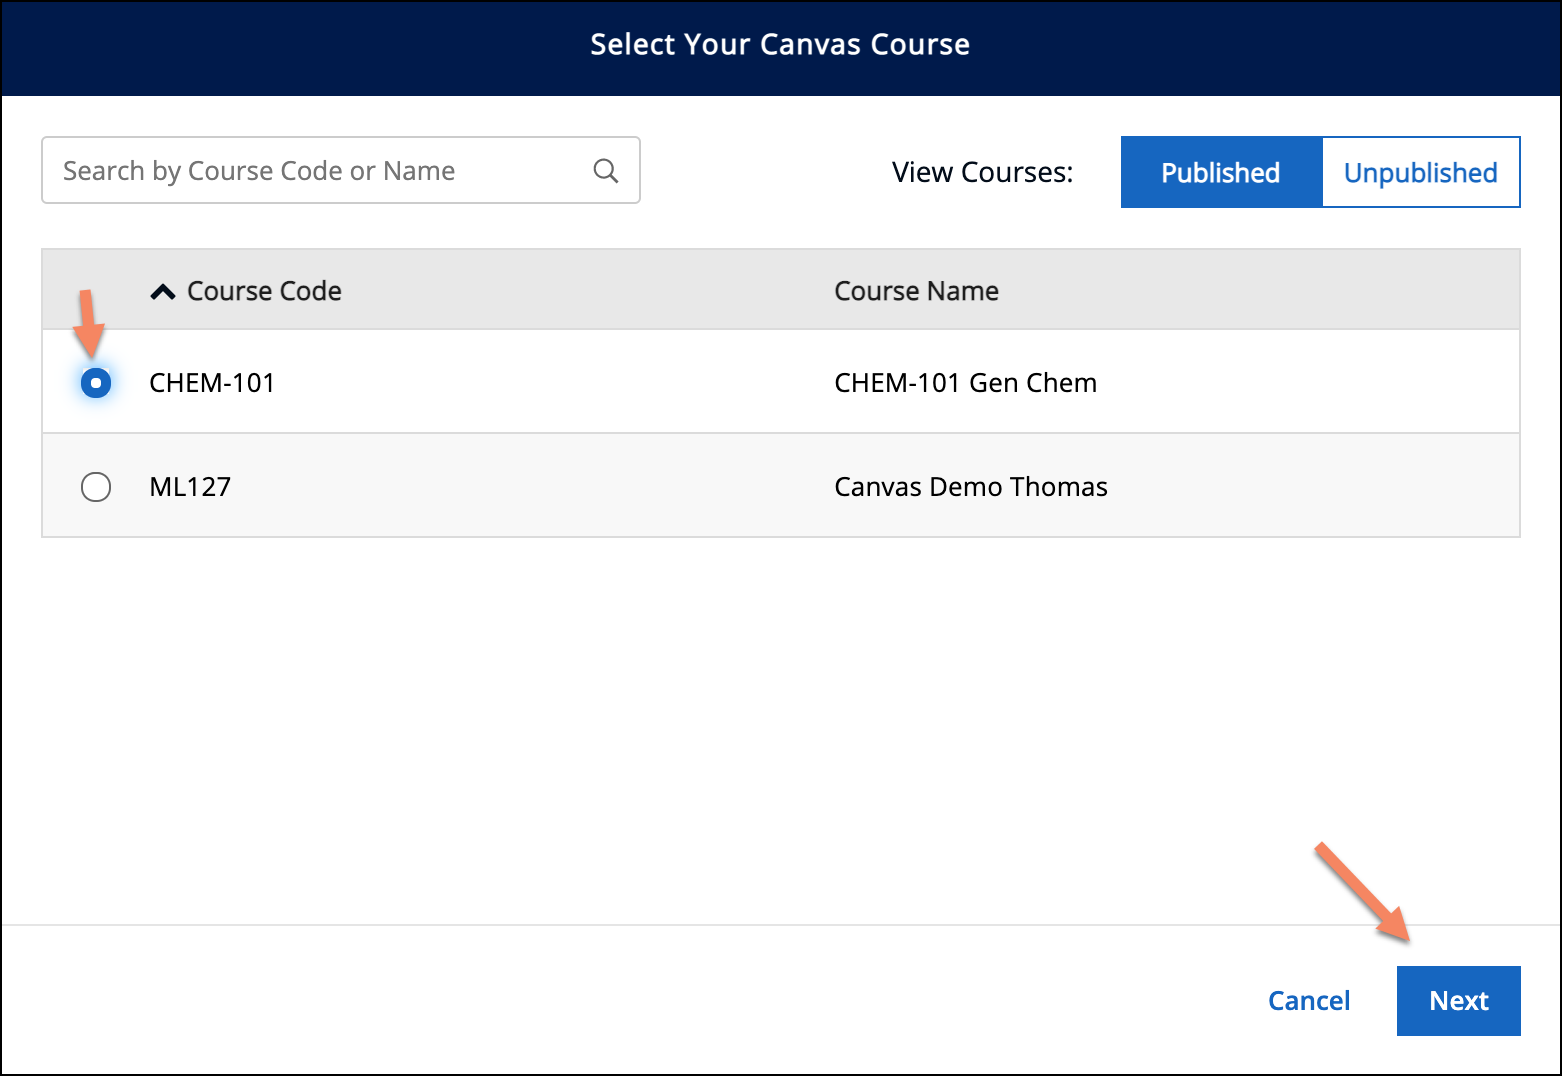 Select Courses and Sections